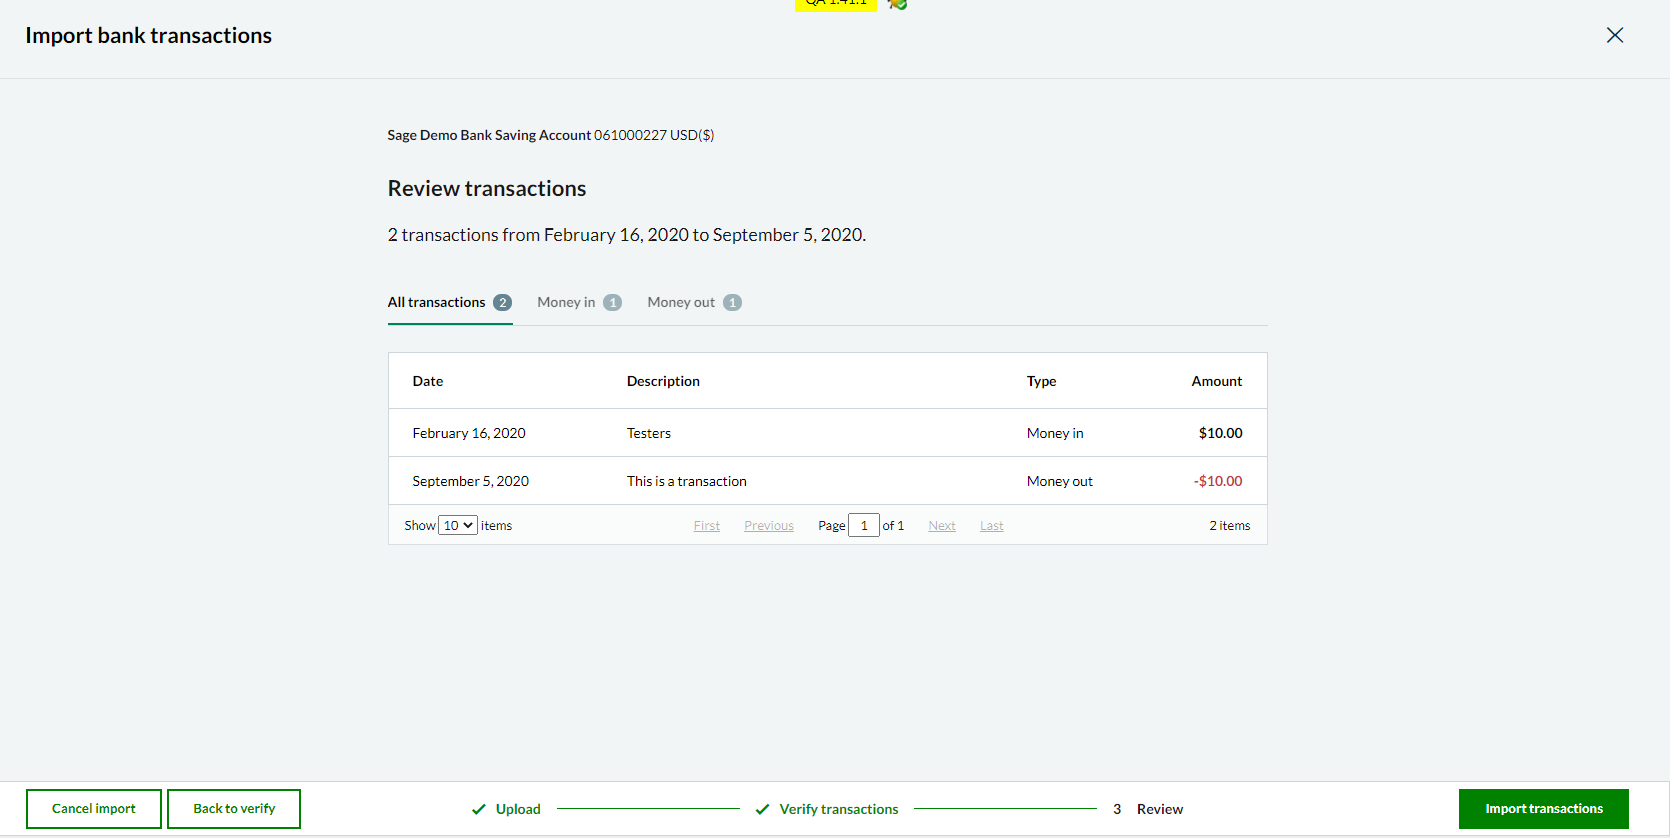 2 transactions are displayed on the Review transactions screen for the user.